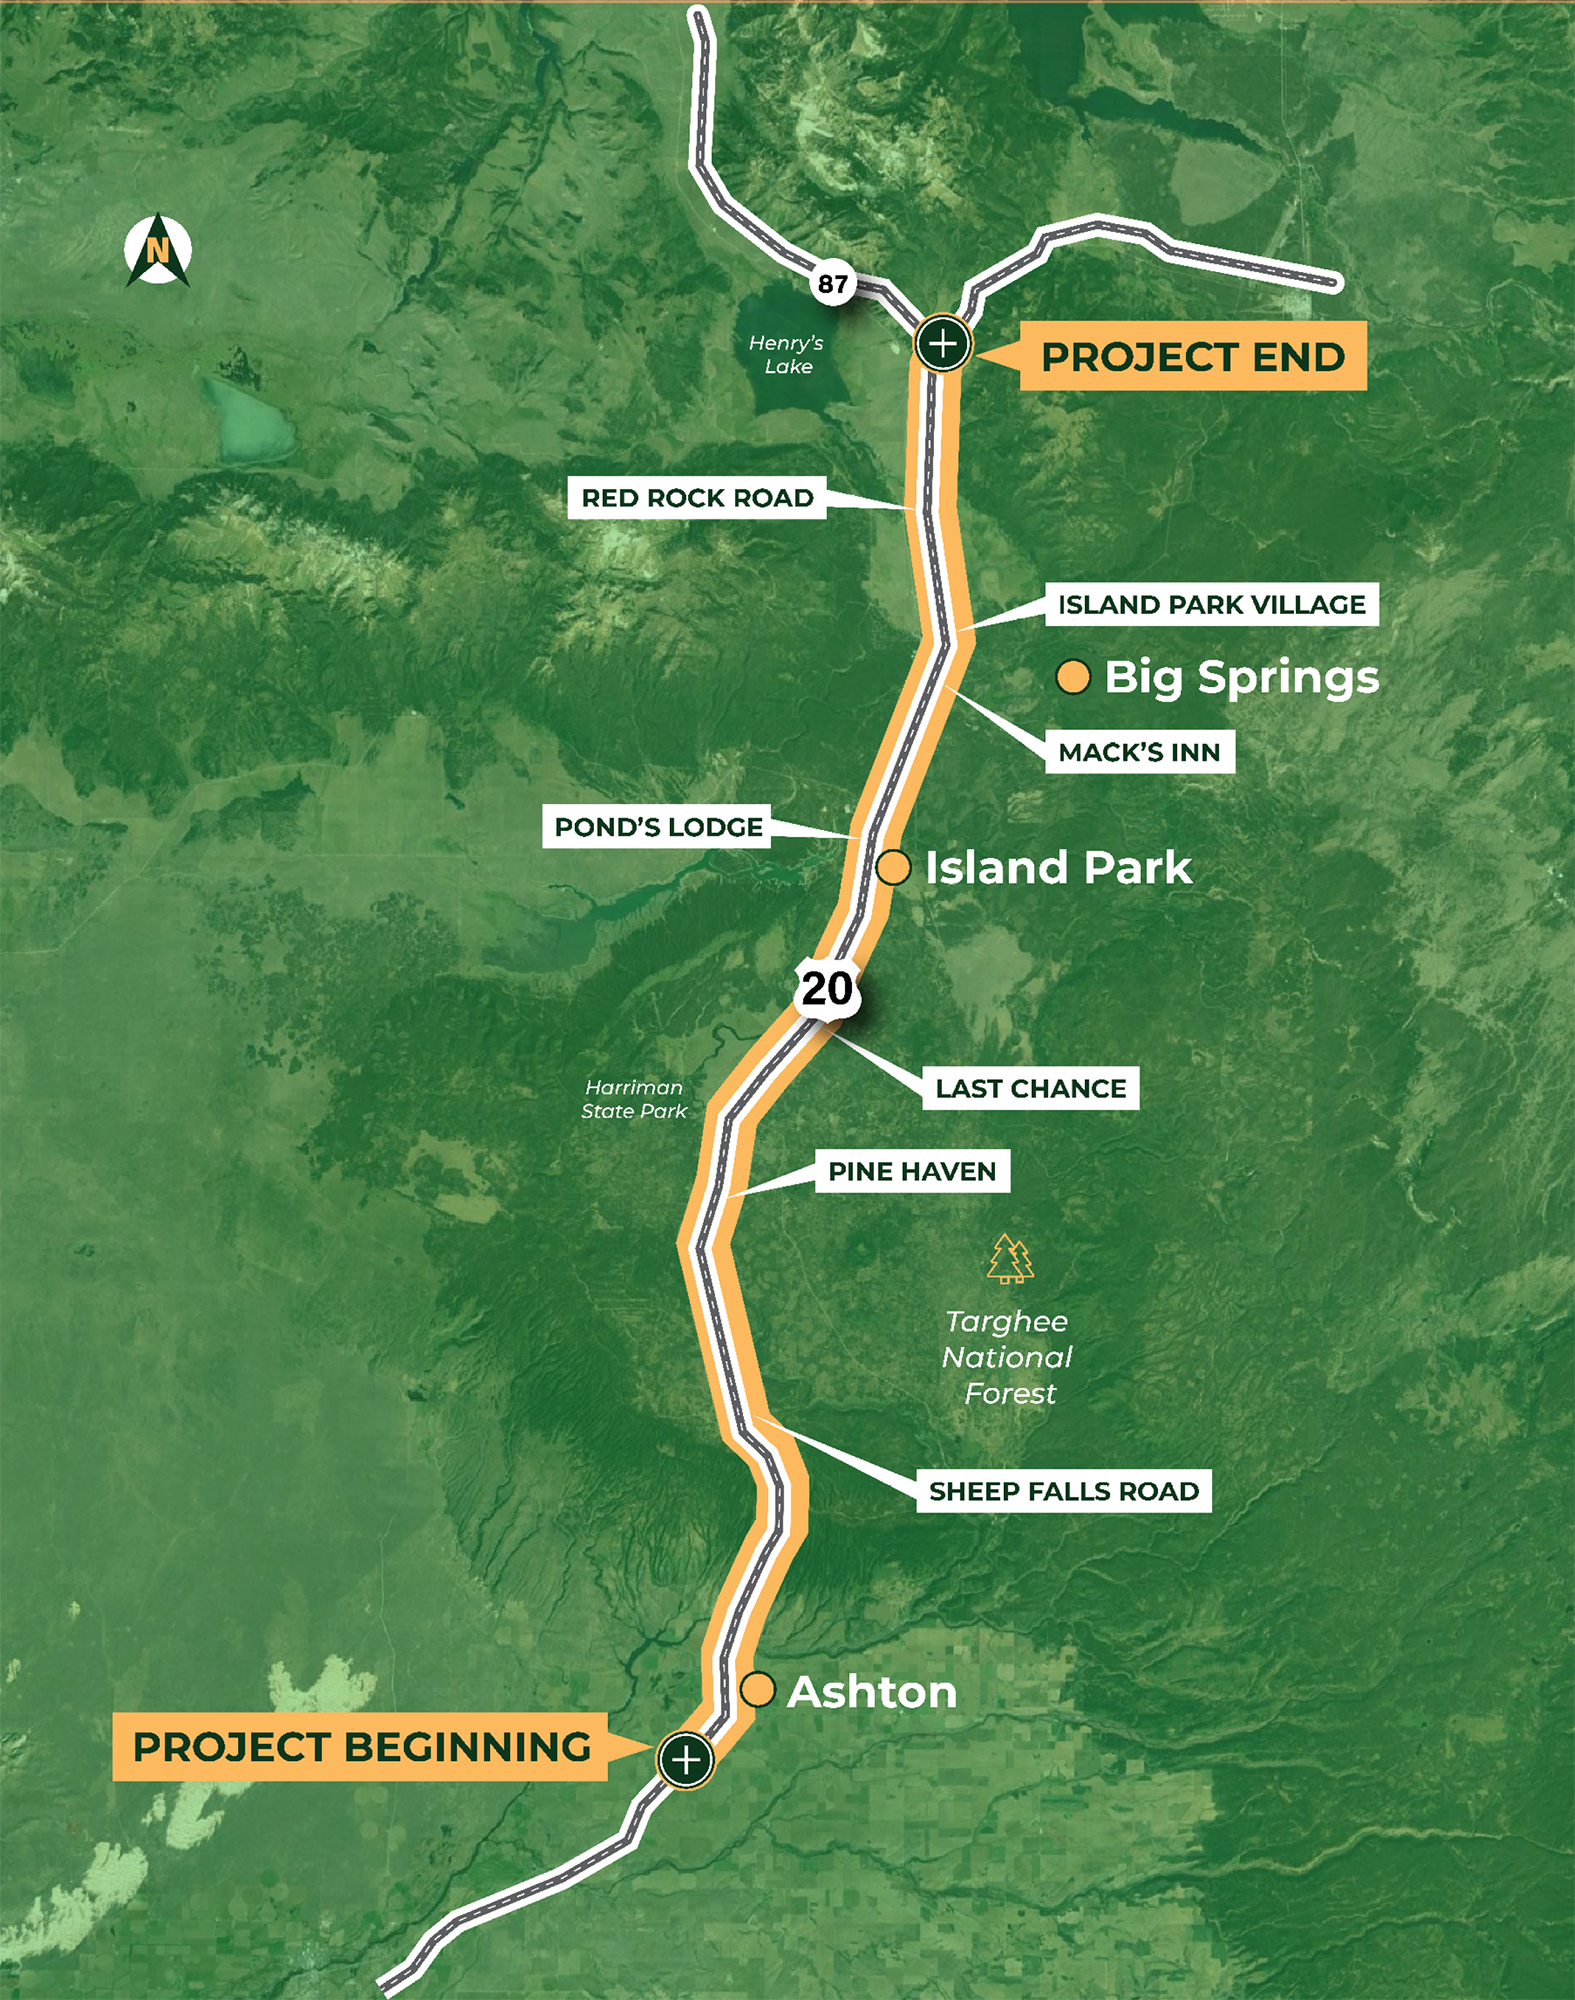 Map of the project area highlighted. Project beginning near Ashton and Ending at SH-87.